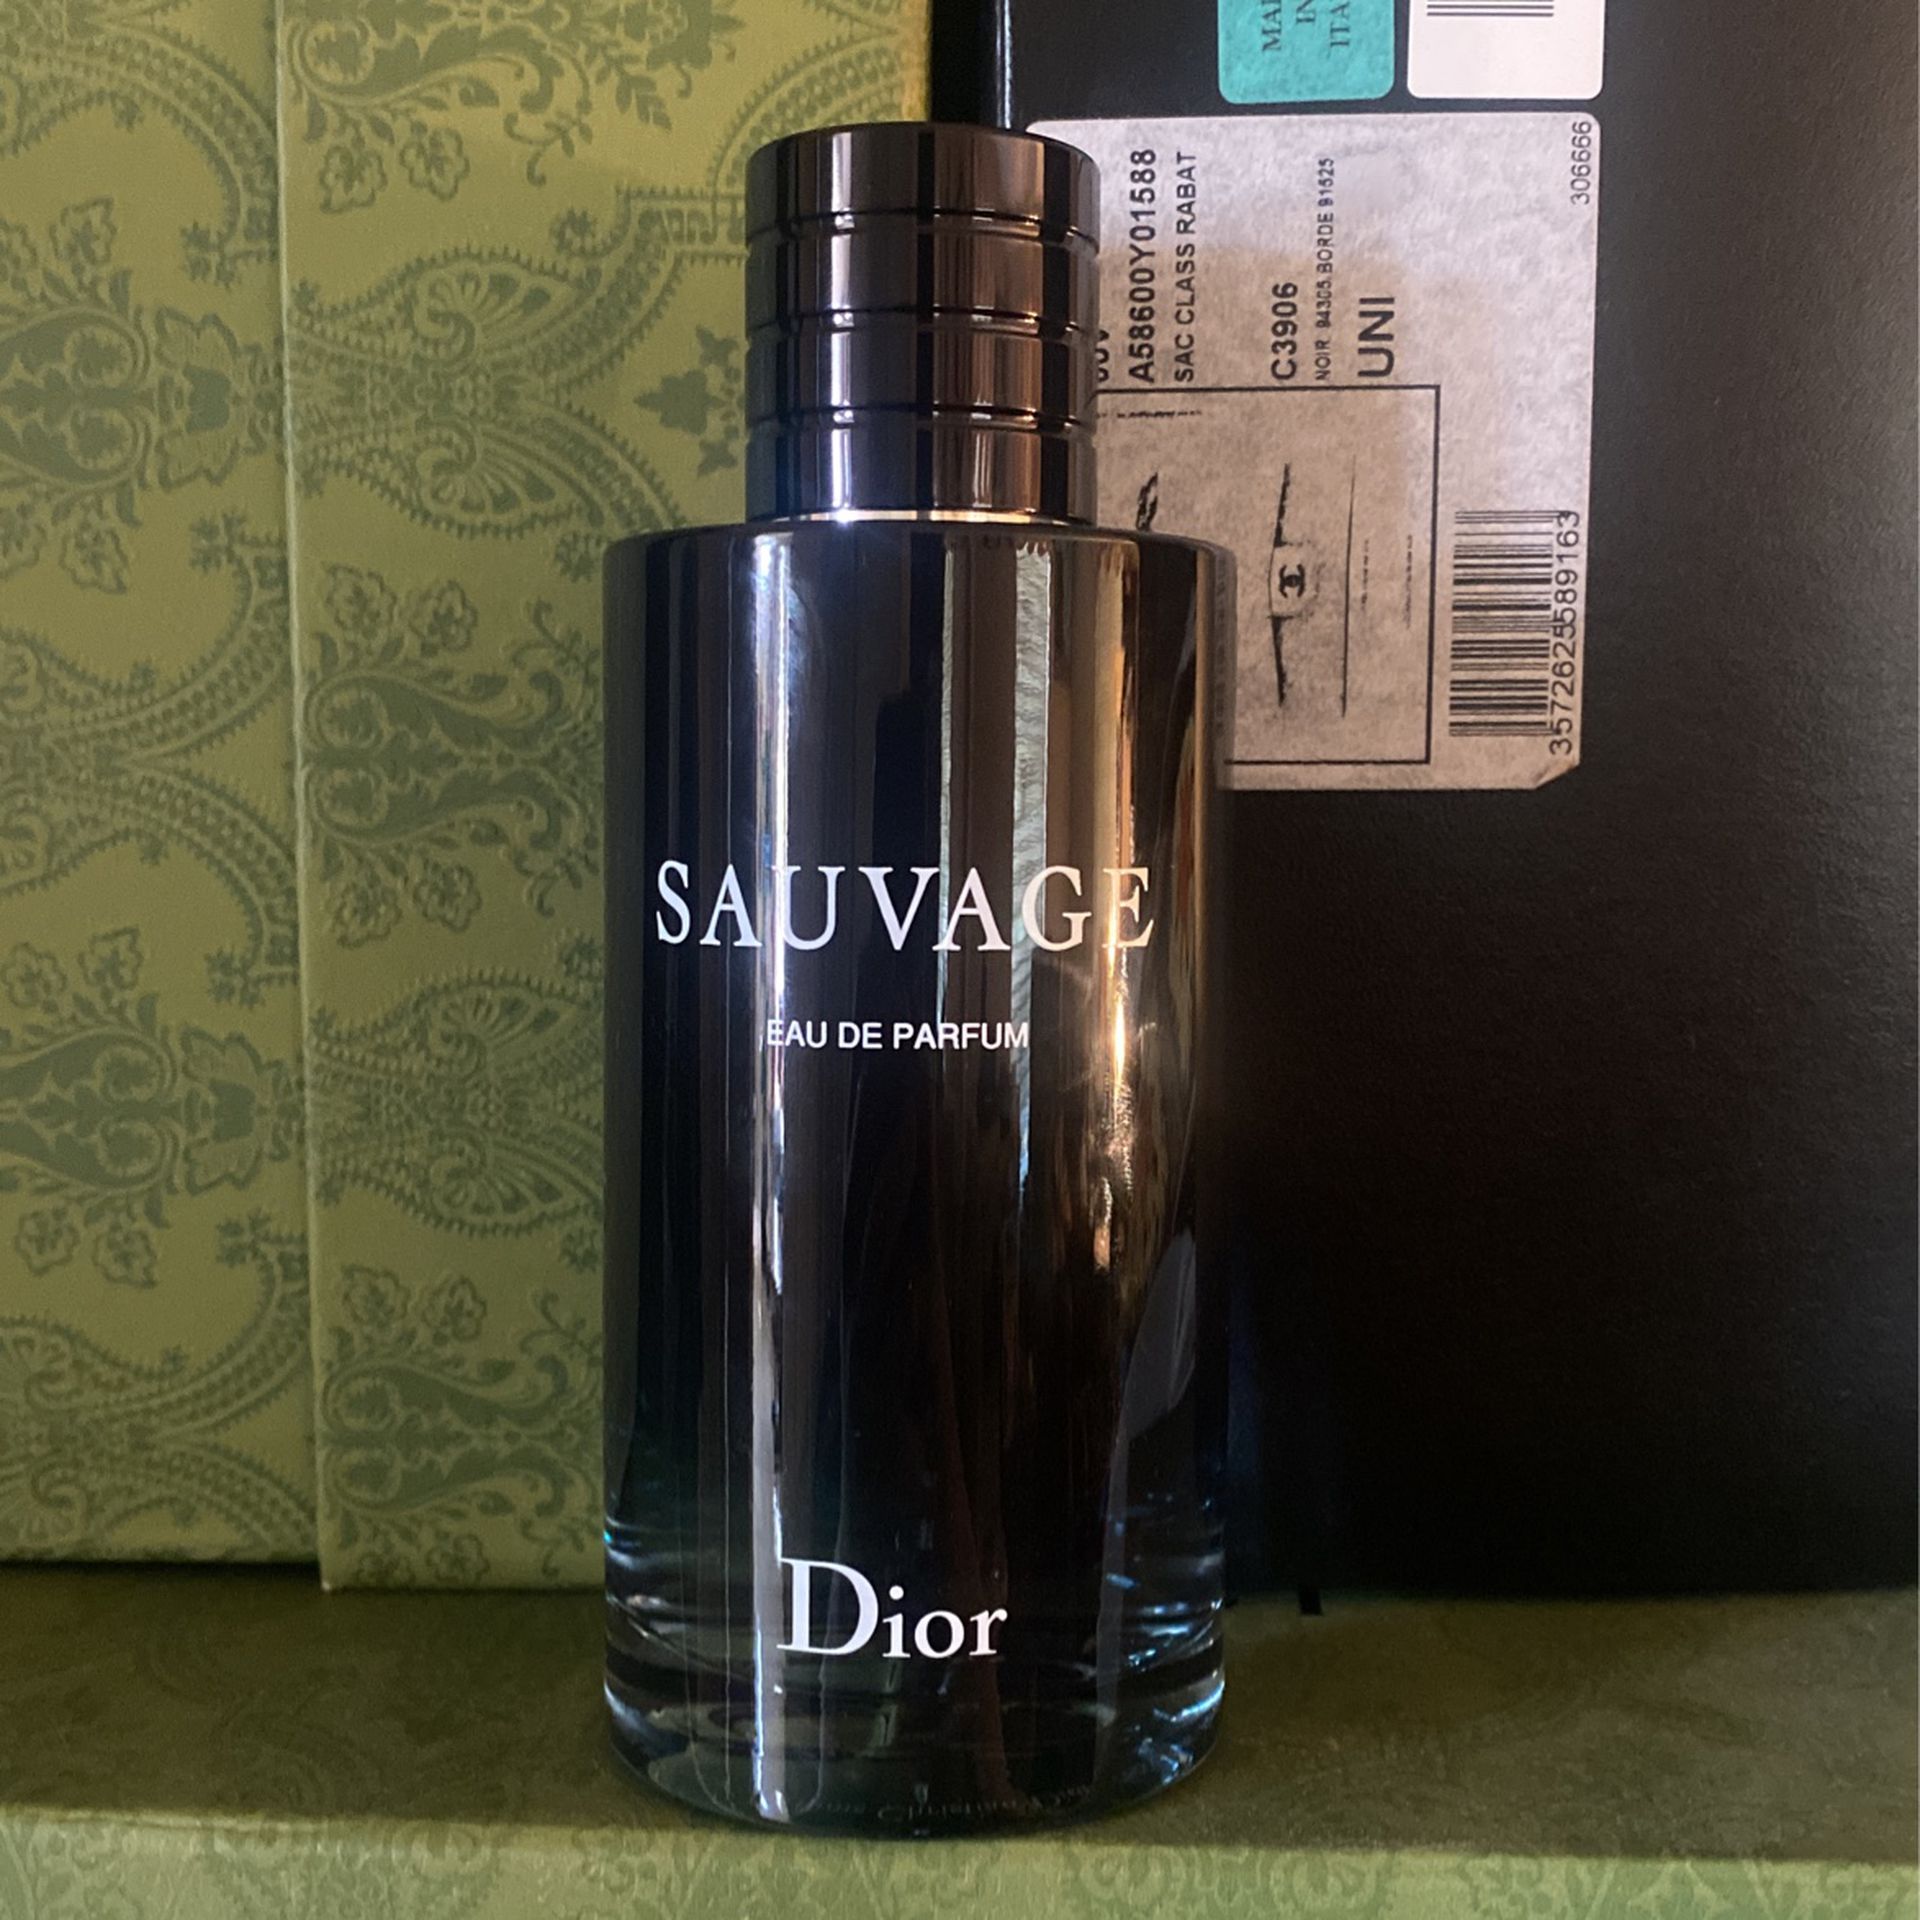 Mens Cologne for Sale in Rancho Cucamonga, CA - OfferUp